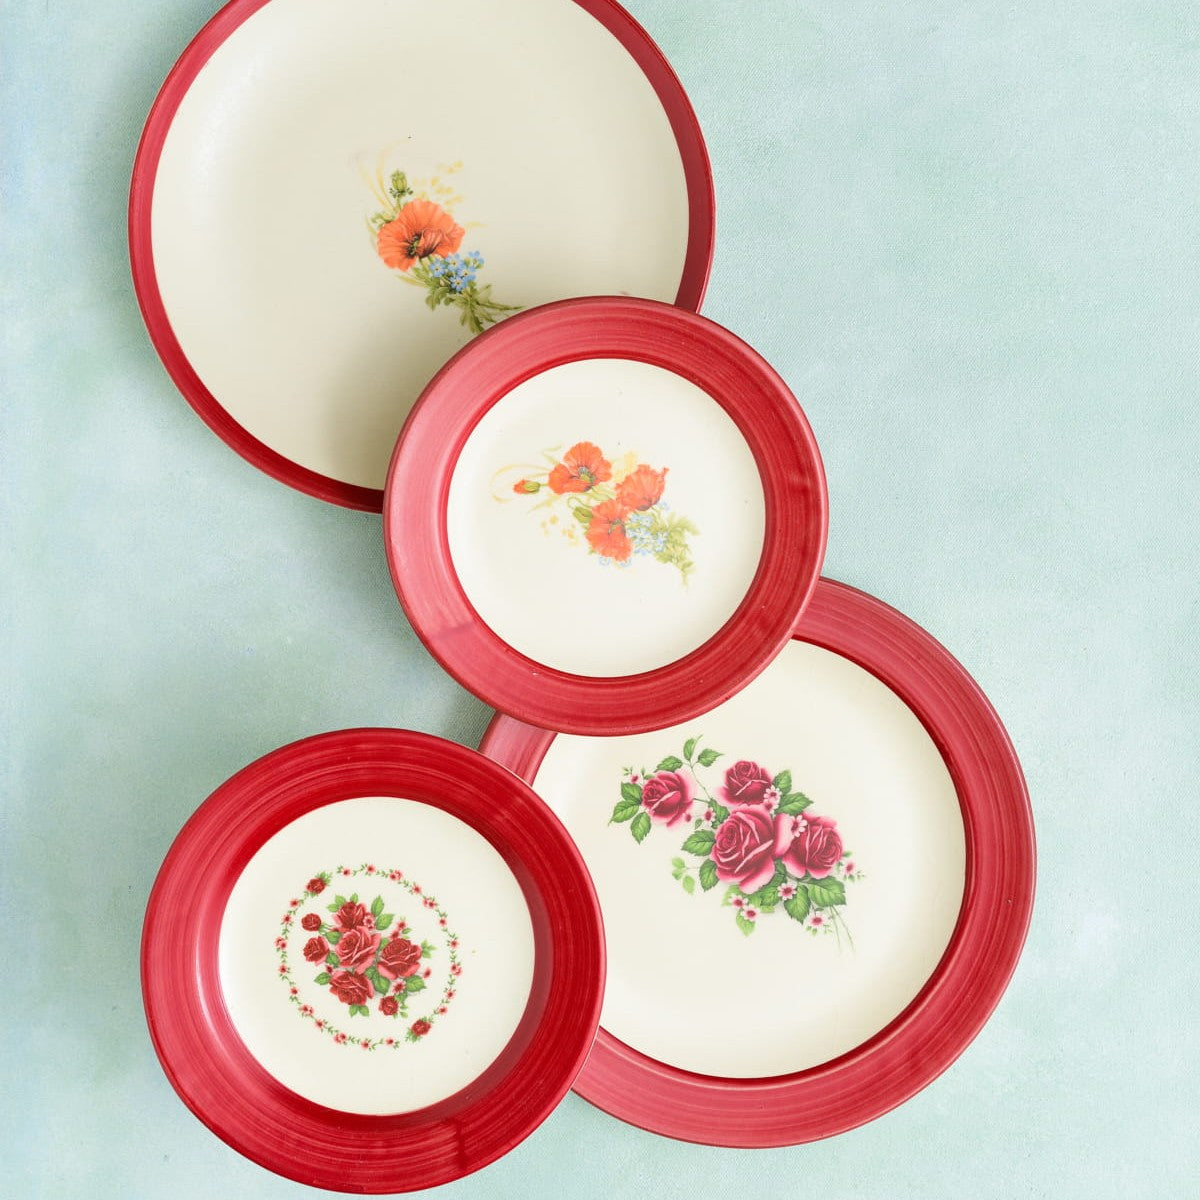 Floral Whispers in Red Wall Decor Ceramics Plate Set of 4